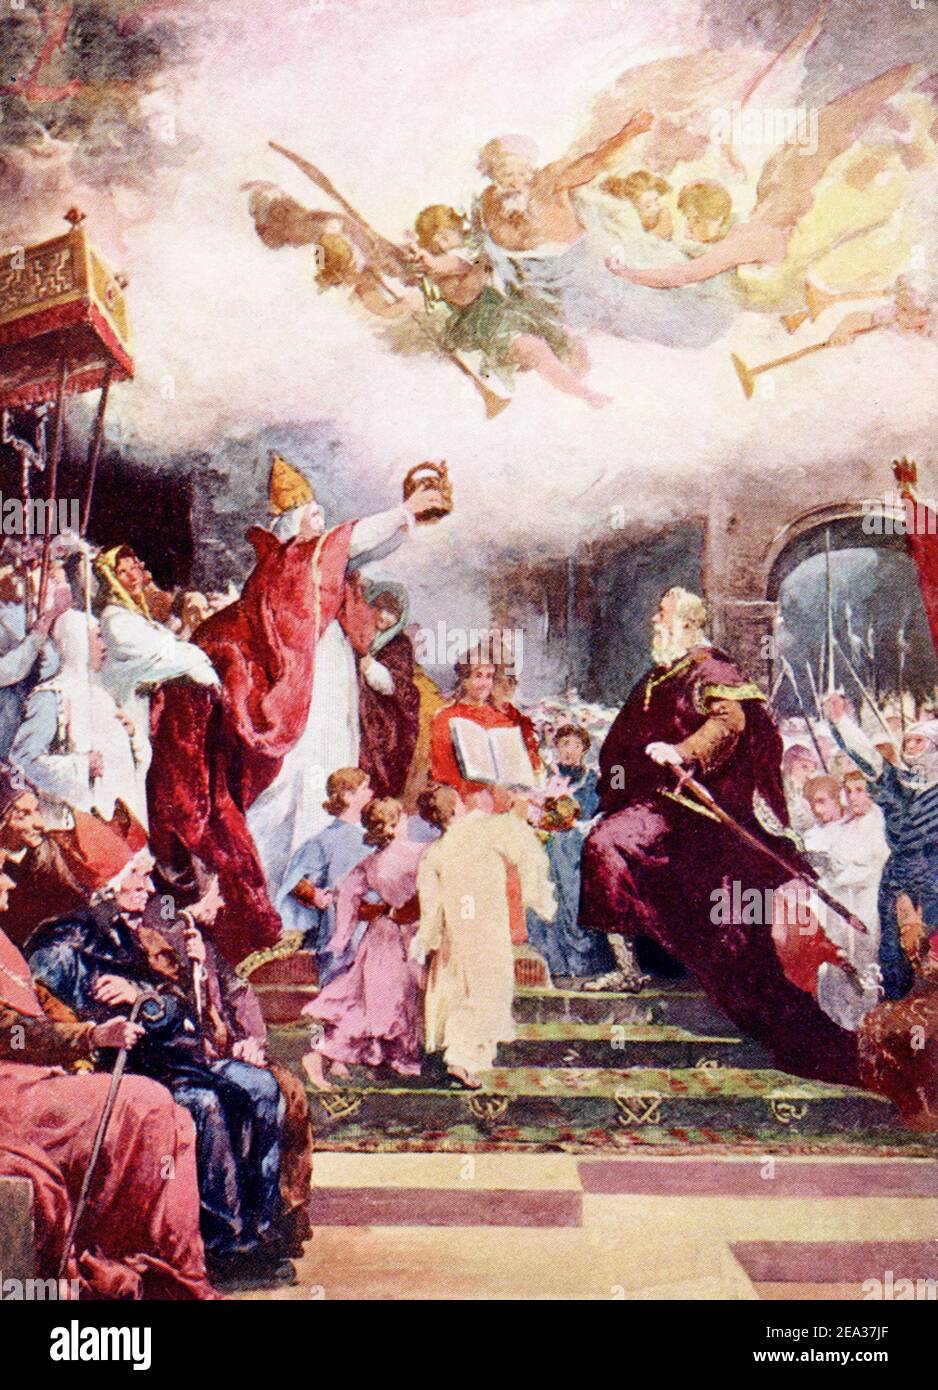 On Christmas Day in the year 800 A.D. Charlemagne, king of the Franks and part of the Carolingian line, was crowned Holy Roman Emperor by Pope Leo III (795-816). The coronation took place during mass at the Basilica of St. Peter in Rome. The coronation of Charlemagne created the Holy Roman Empire, which endured until 1806. Stock Photo